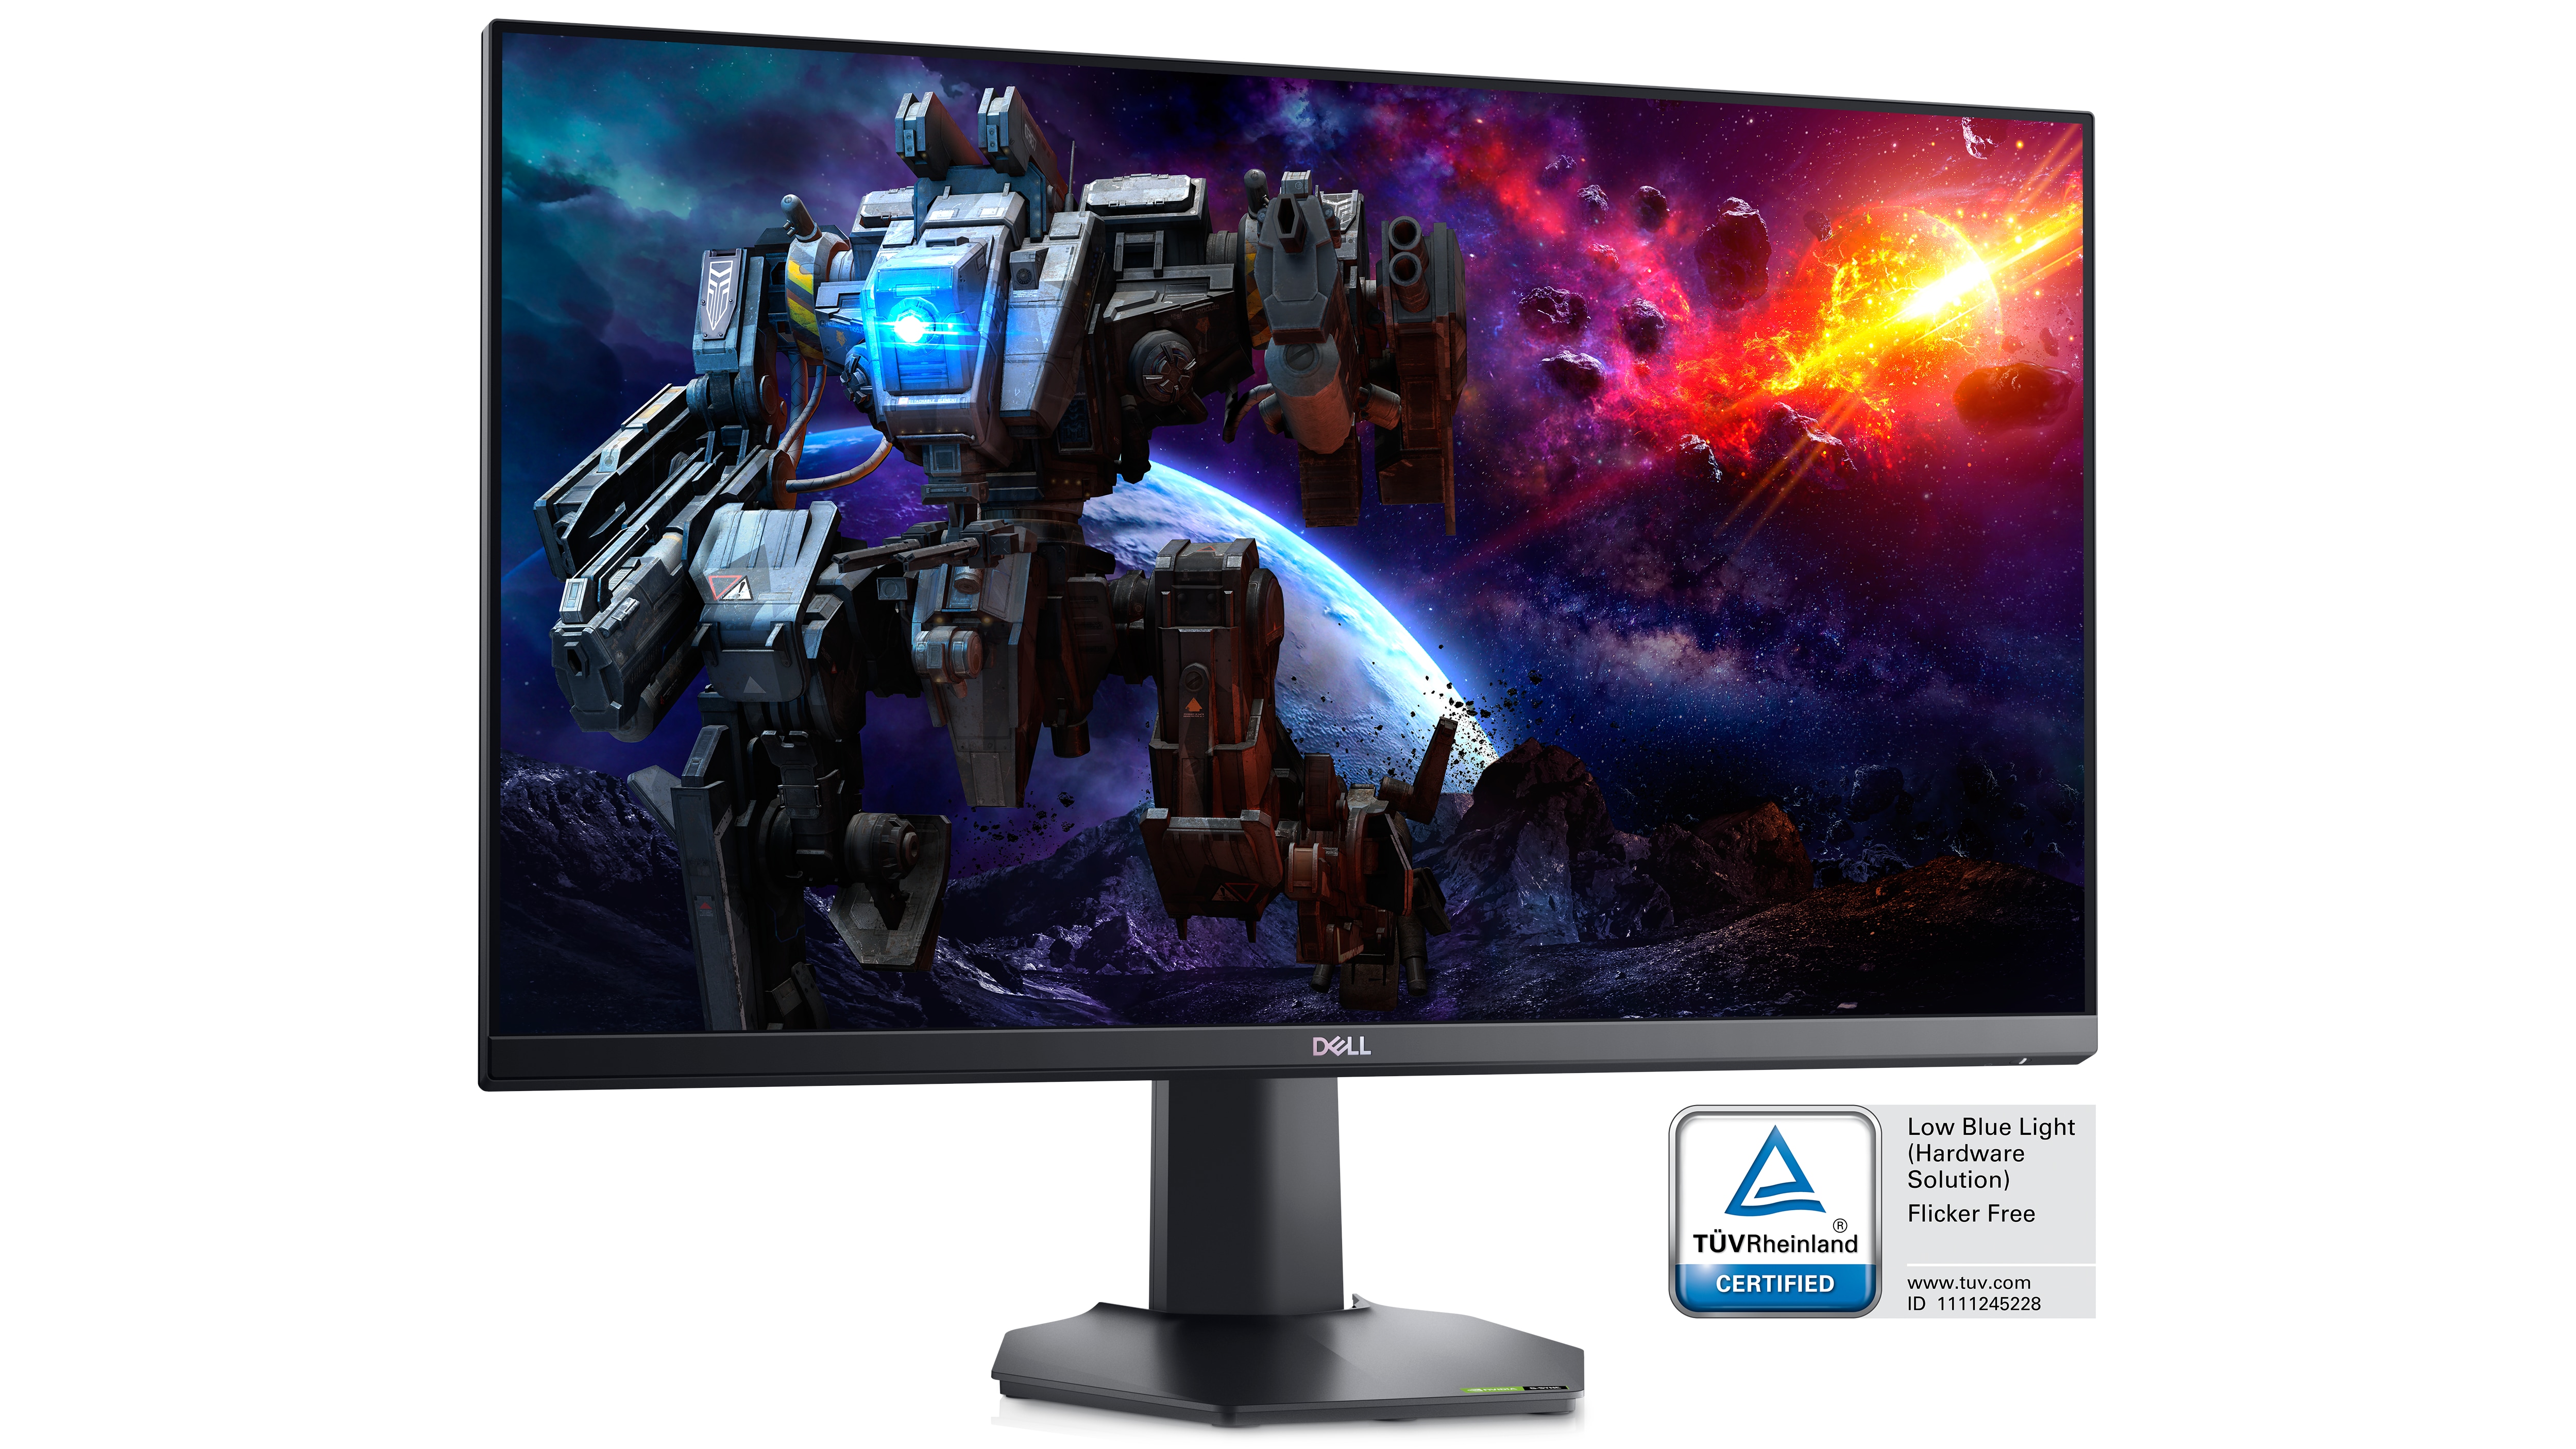 Picture of a Dell G2722HS Gaming Monitor with a game image on the screen and a white background.